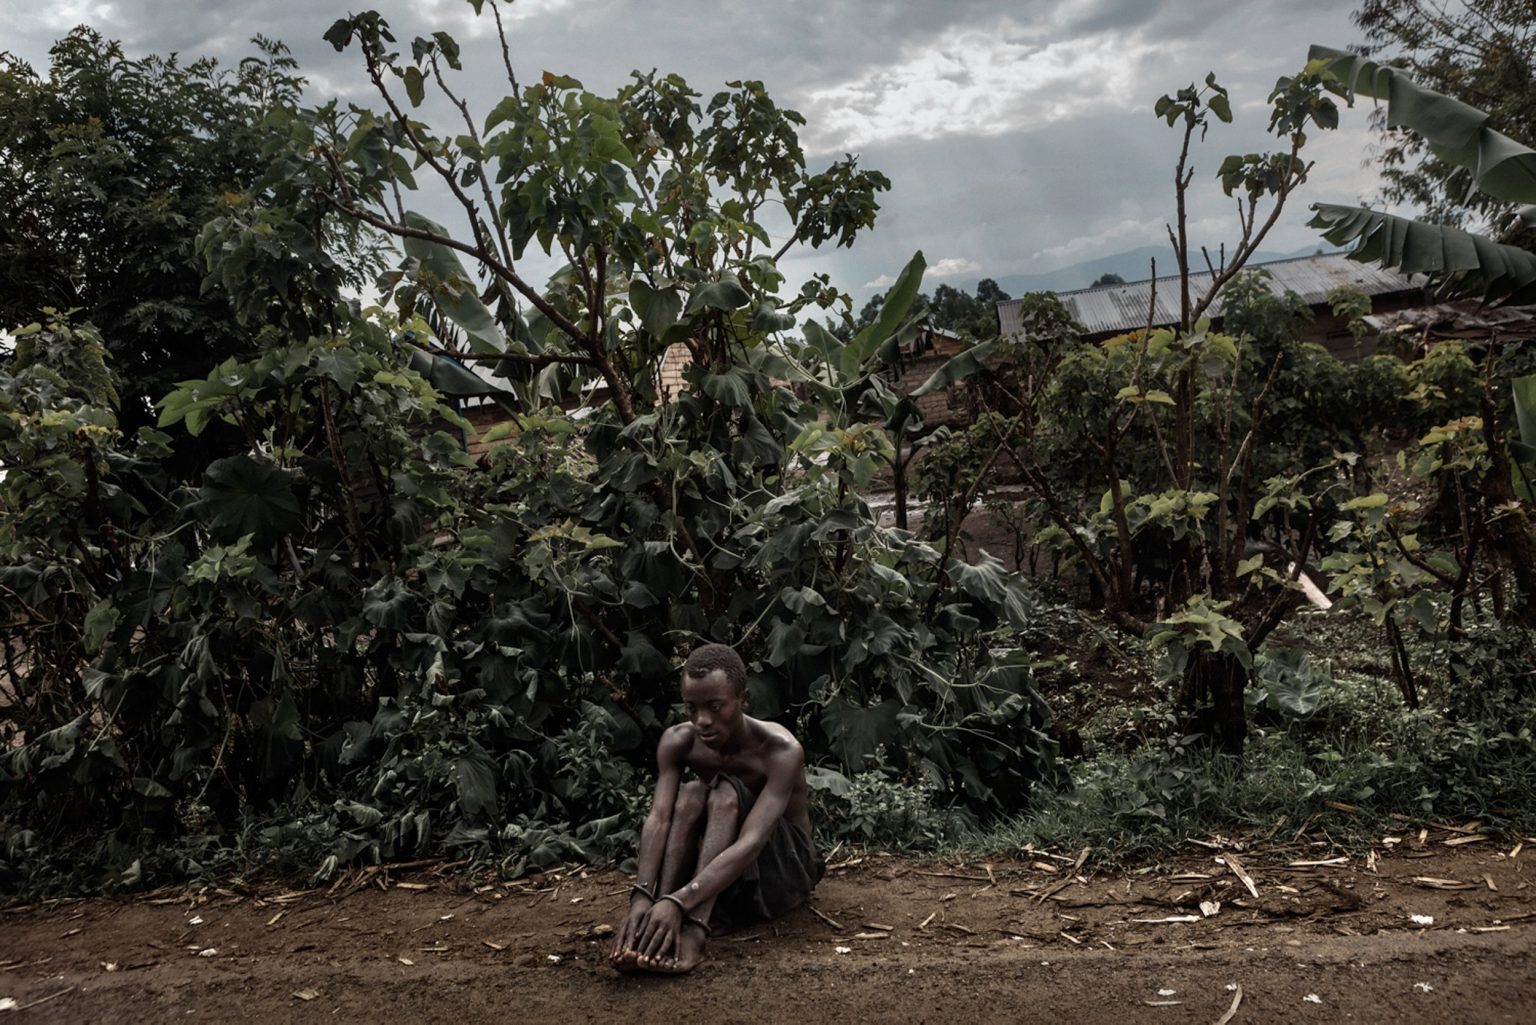 A view of the territory of the Province of Rutshuru, governed by the M23 rebels, successors of the CNDP and accused by both the UN and the government of Kinshasa of being supported by Rwanda. A mentally ill kid chained is sitting on the edge of the road. He has been shackled by his parents because he used to throw rocks against M23's vehicles. Goma, North Kivu, Democratic Republic of Congo, 2012